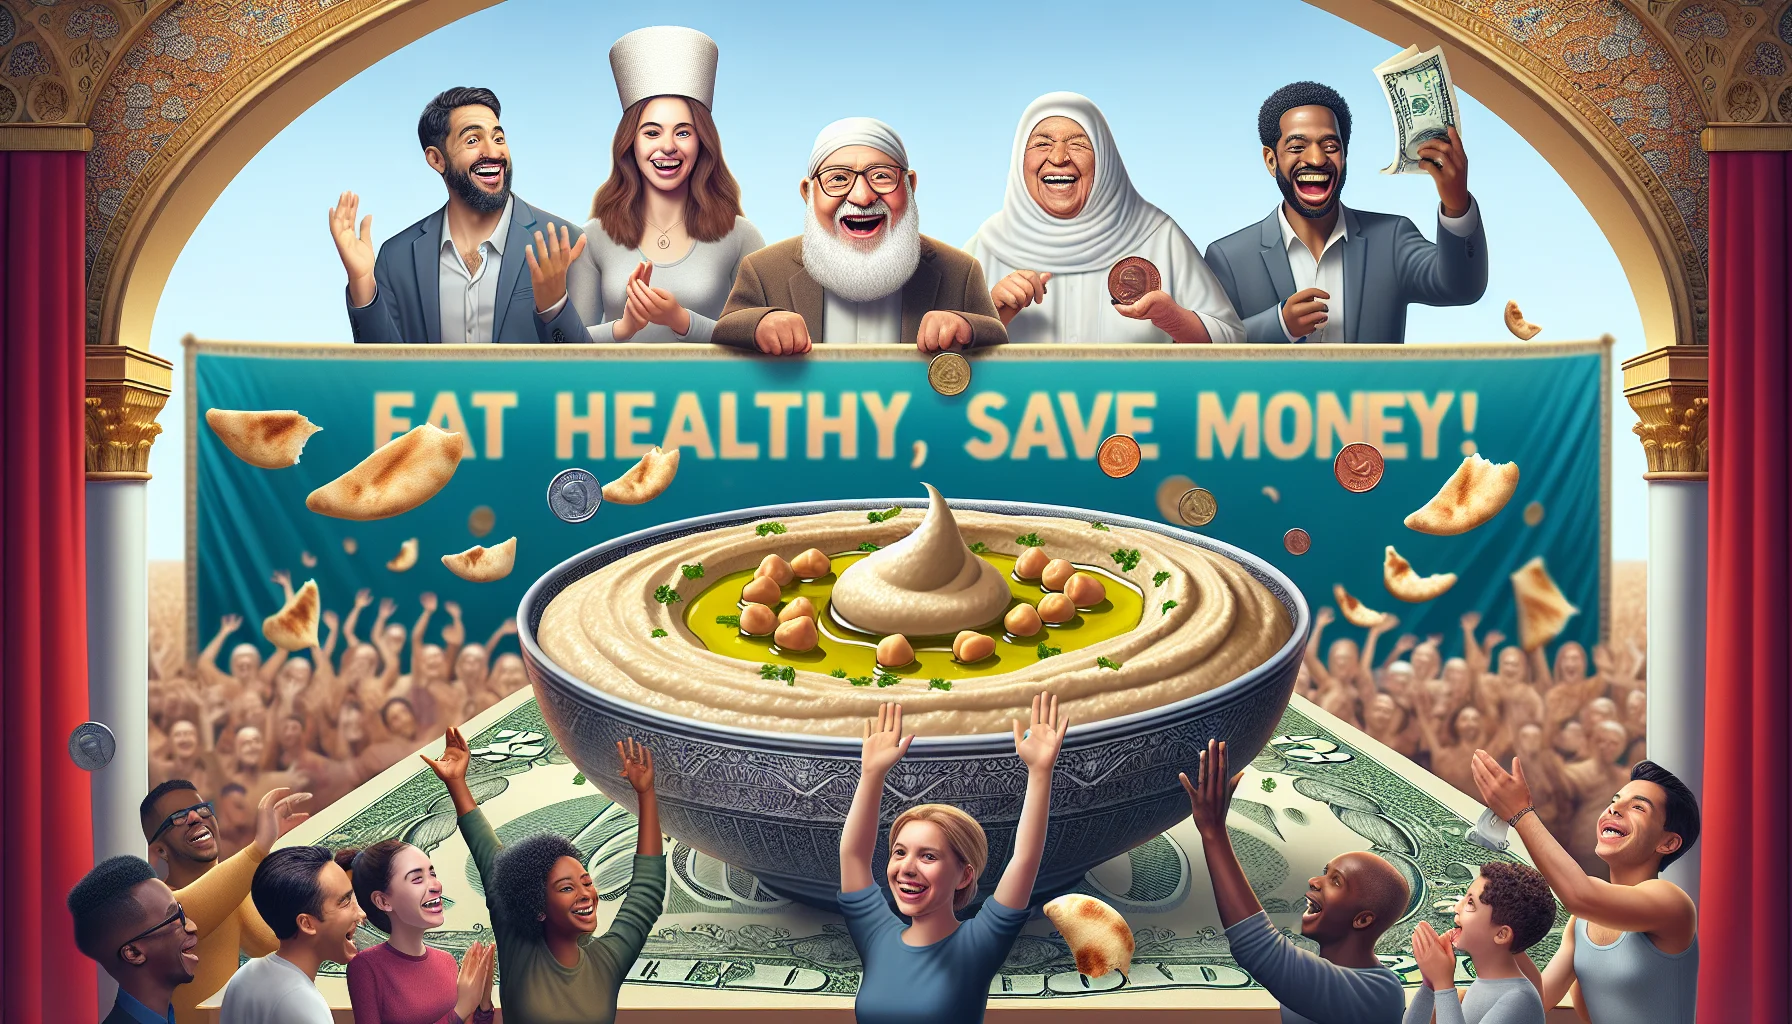 Generate a humor-filled image exhibiting a Lebanese Hummus recipe on a grand stage. On the stage is a large bowl filled with creamy hummus garnished with olive oil and chickpeas, surrounded with pita bread. Below the stage, a diverse group of people: an Hispanic old man raising his hat in surprise, a White, young woman grinning ear-to-ear, a Black middle-aged man laughing heartily, a South Asian girl clapping excitedly, and a Middle-Eastern boy eagerly reaching out to taste. Floating above is a banner proclaiming 'Eat Healthy, Save Money' surrounded by flying pennies and dollar bills.